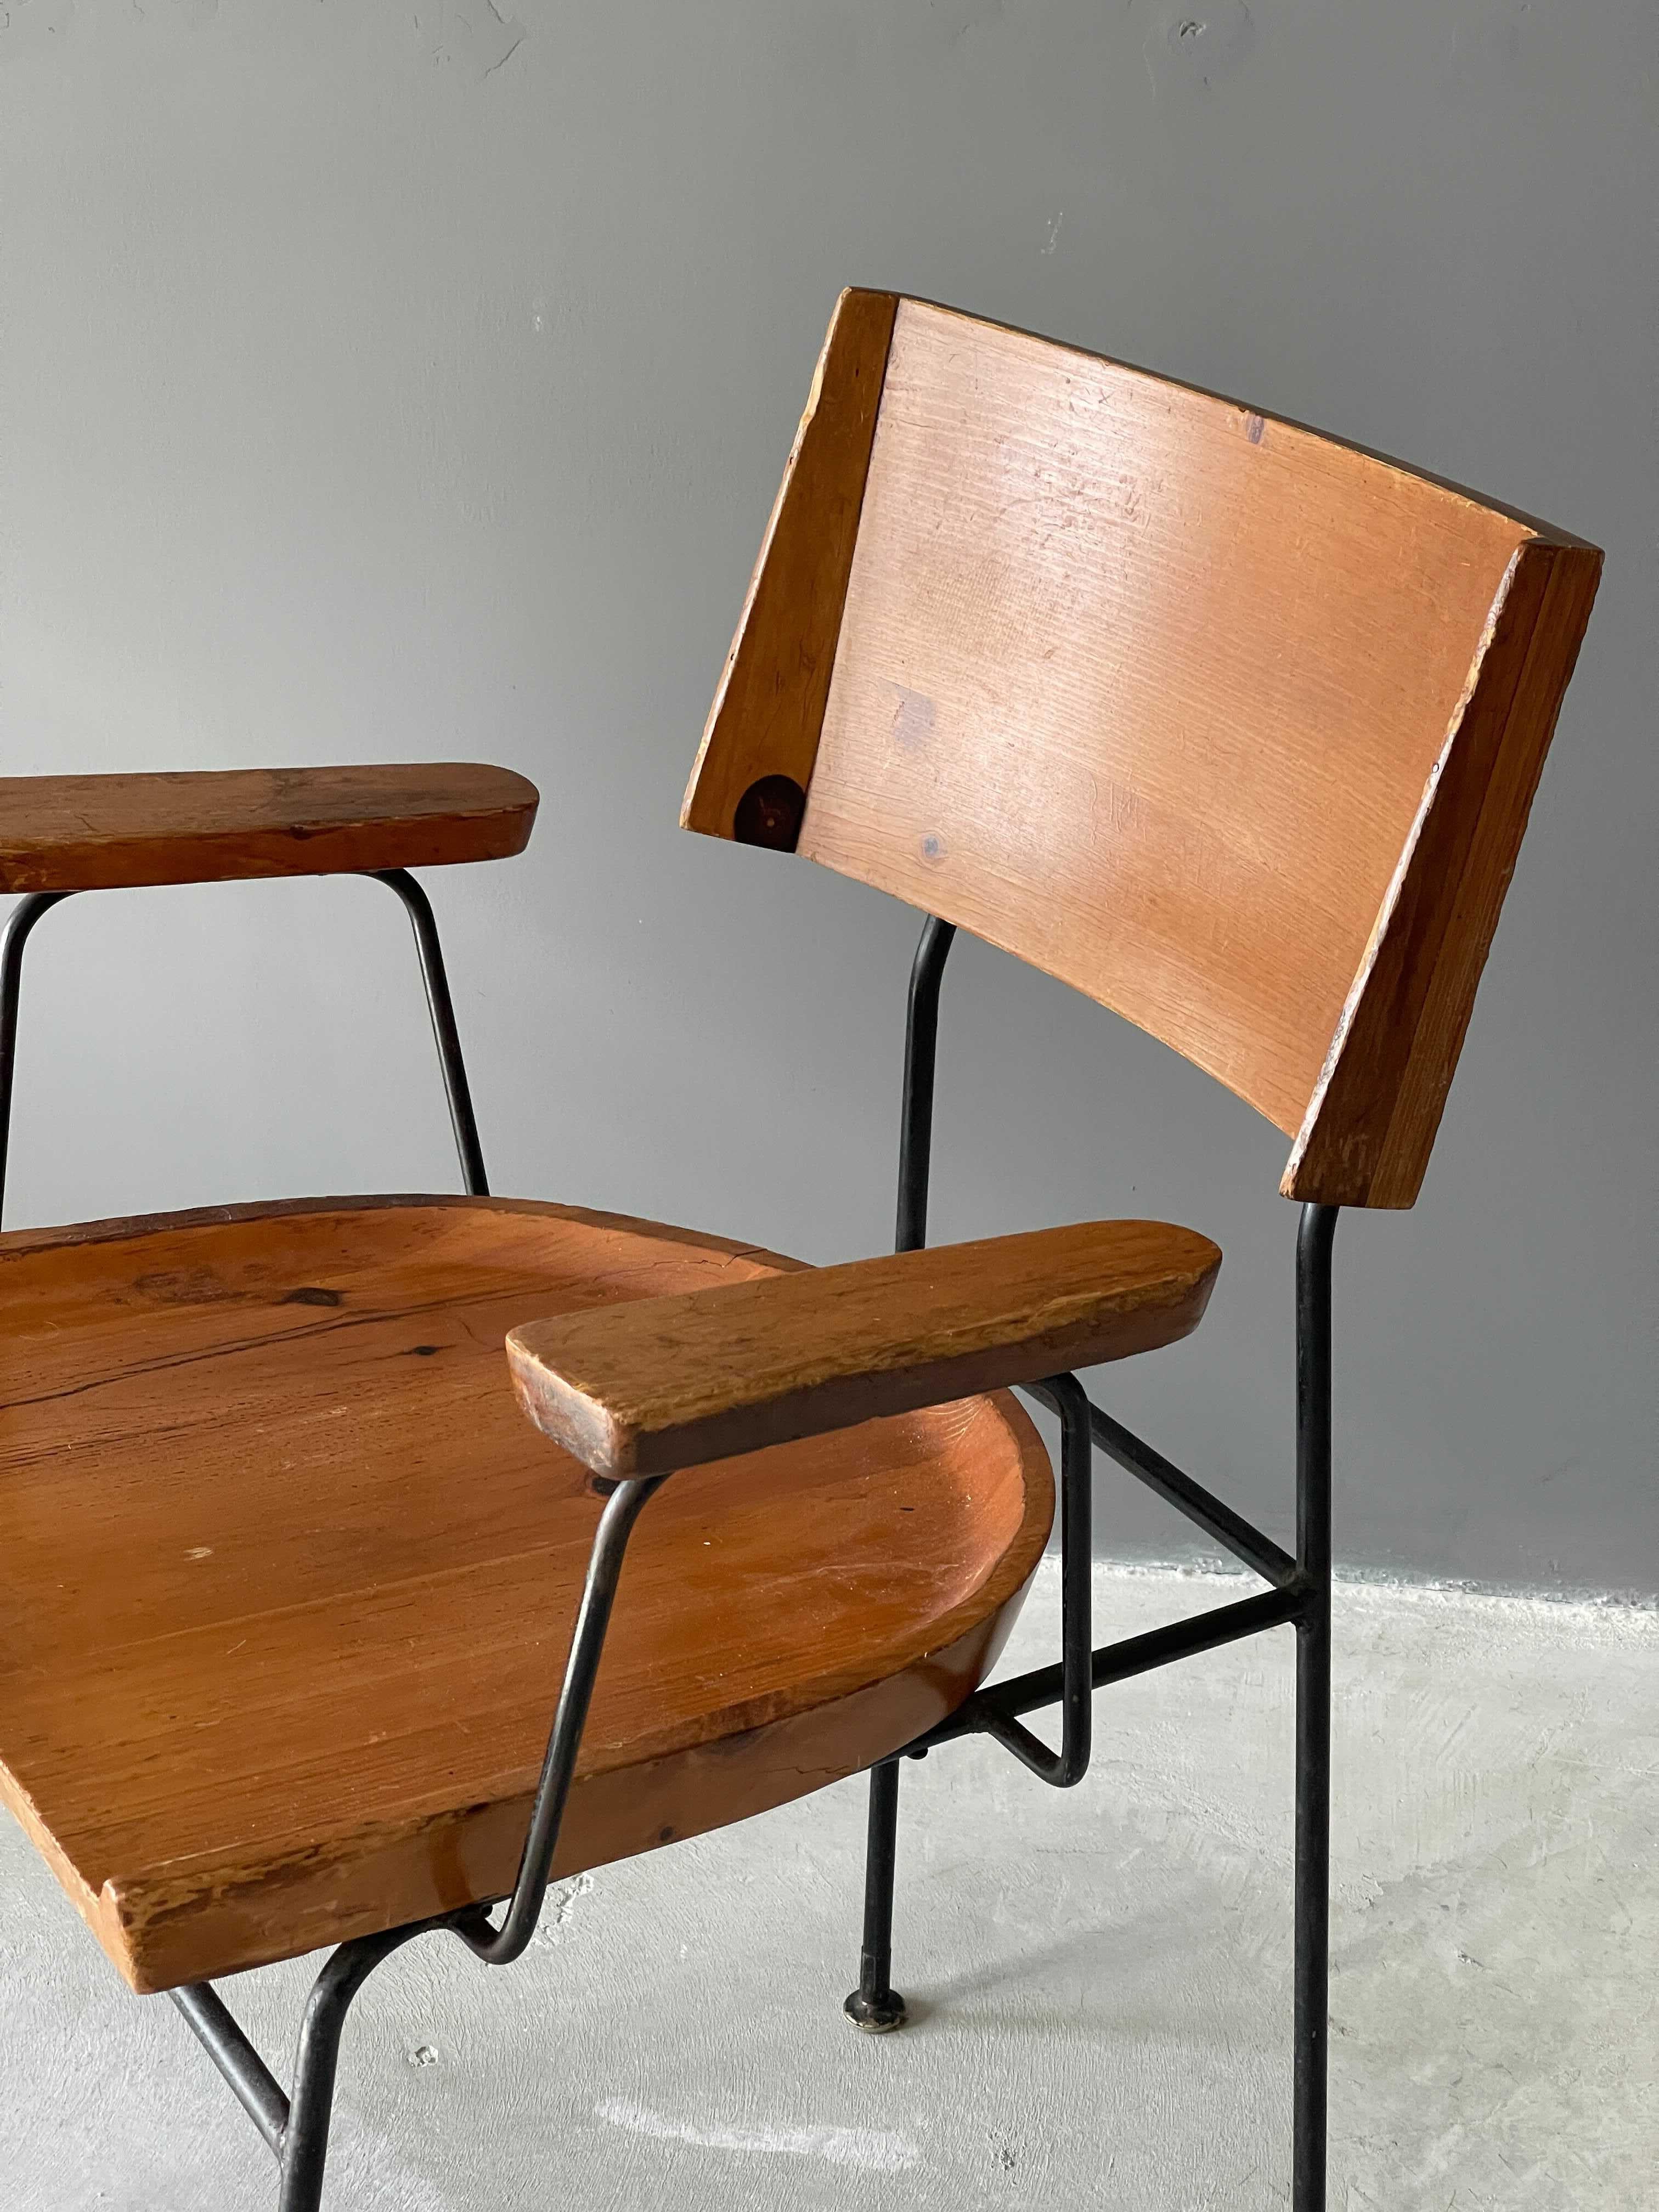 American Arthur Umanoff, Arm Chair, Solid Pine, Lacquered Iron, America, 1950s